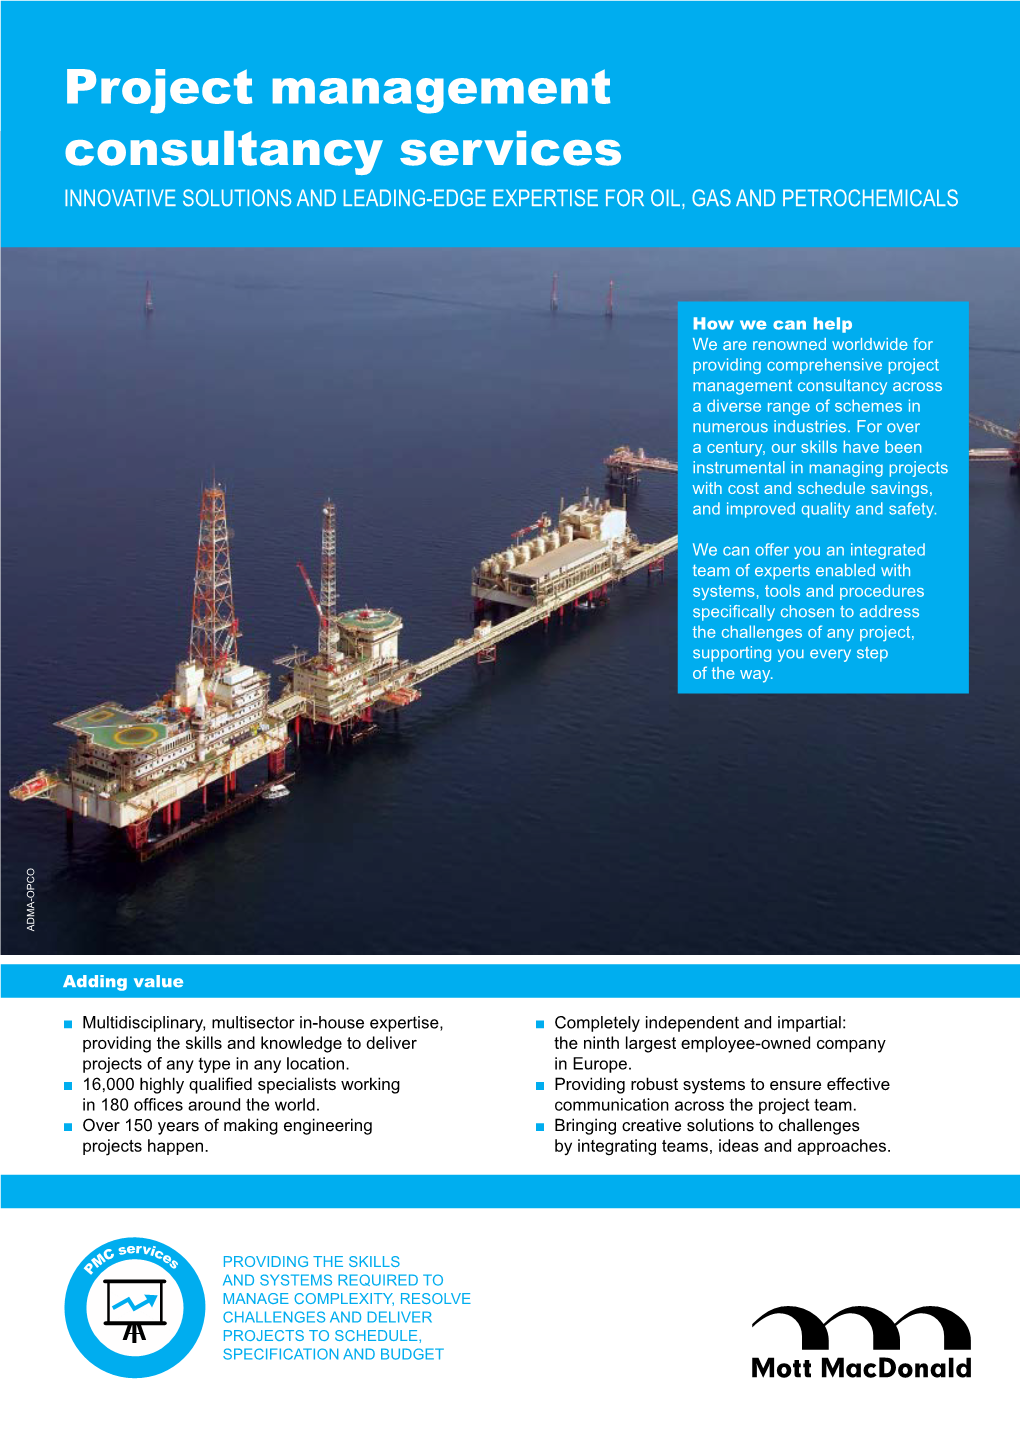 Project Management Consultancy Services INNOVATIVE SOLUTIONS and LEADING-EDGE EXPERTISE for OIL, GAS and PETROCHEMICALS